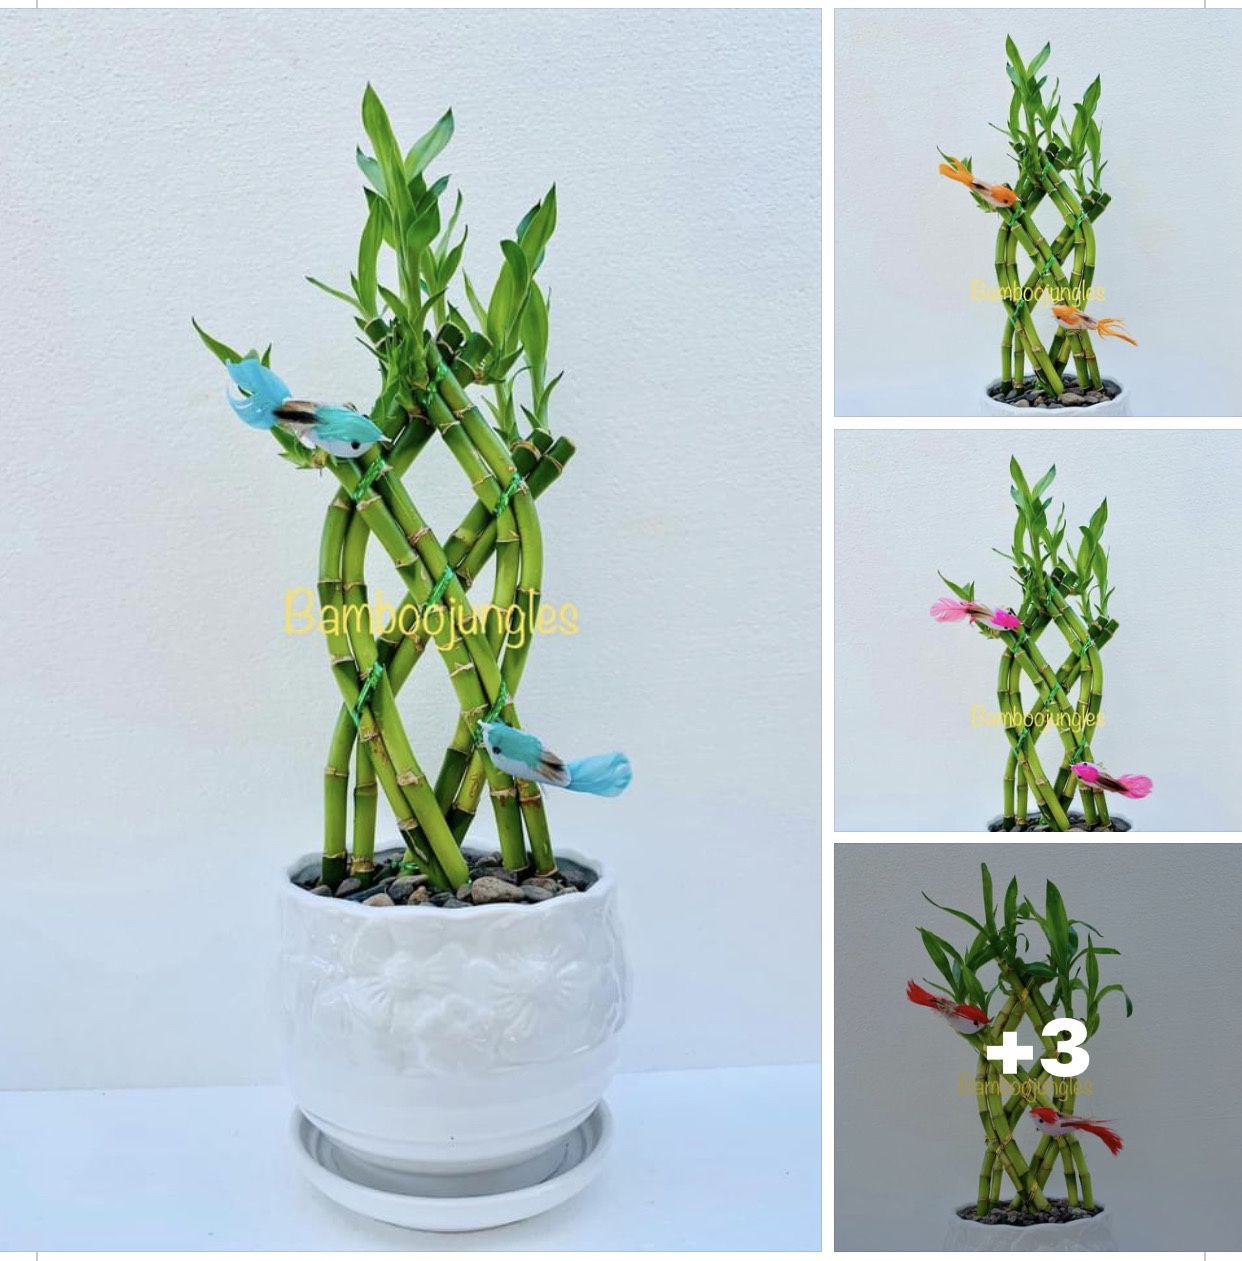 SHIPPING AVAILABLE Trellis Lucky Bamboo Live Plant Ceramic Pot Assorted Color Bird 14" Tall $12/each